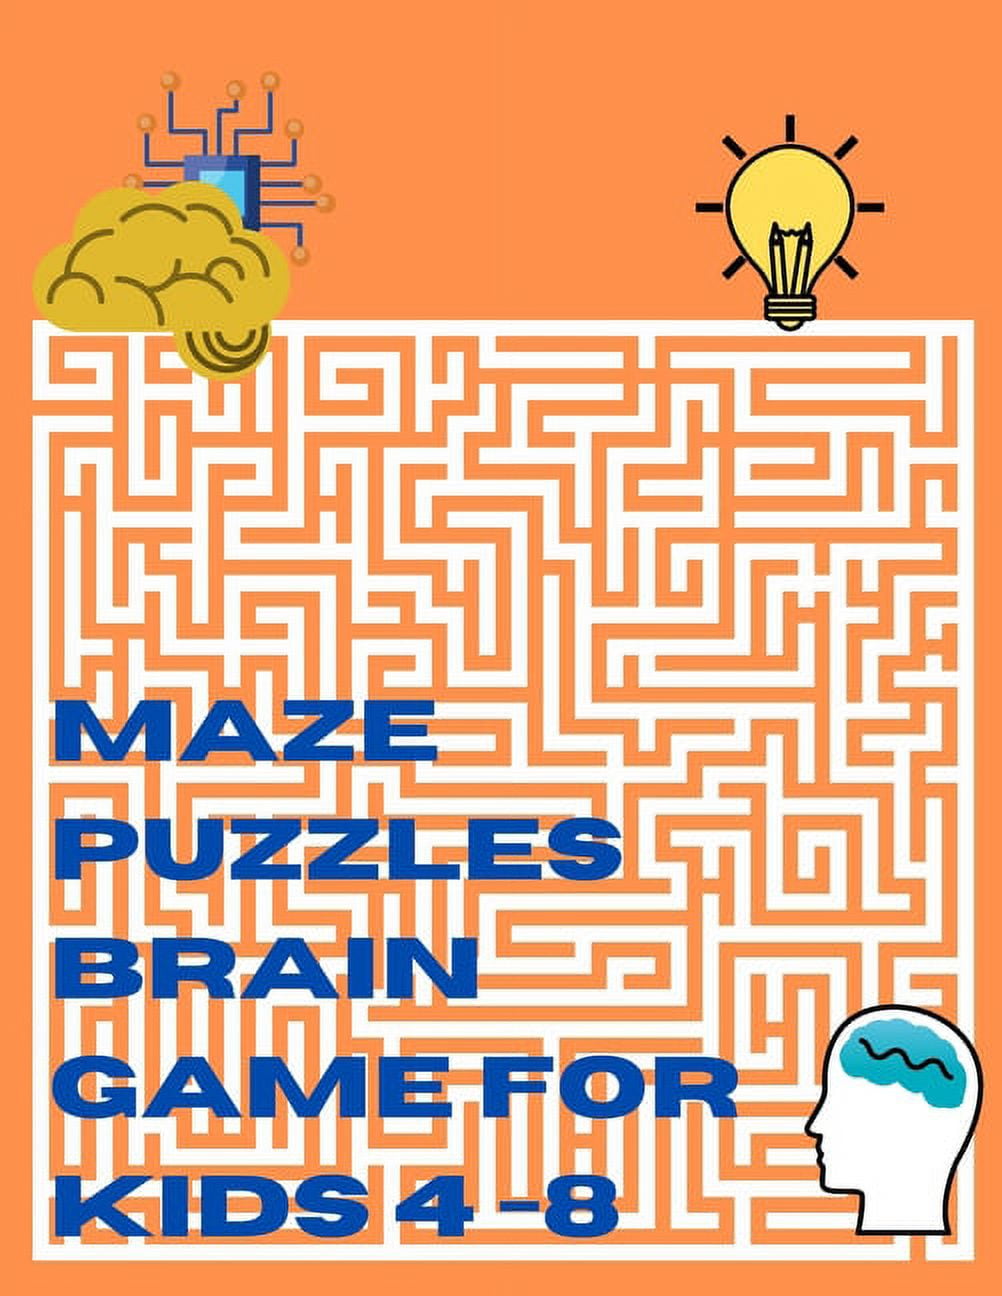 Mazes For Kids Ages 4-8: Maze Activity Book for Kids | 4-6, 6-8 | Workbook for Games, Puzzles, and Problem-Solving [Book]